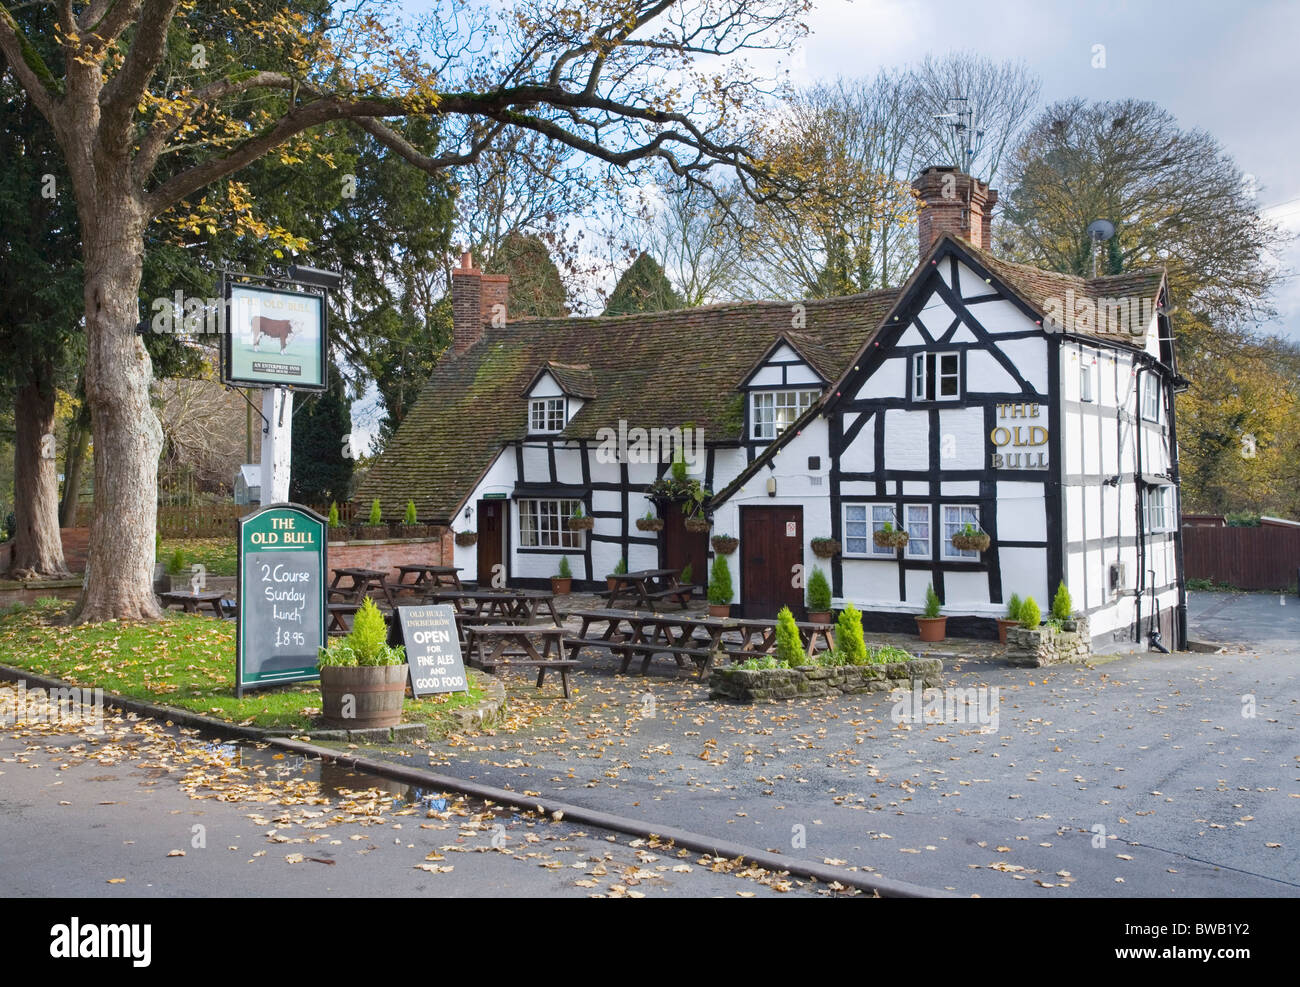 Le Old Bull Inn à Inkberrow. Worcestershire. L'Angleterre. UK. Banque D'Images